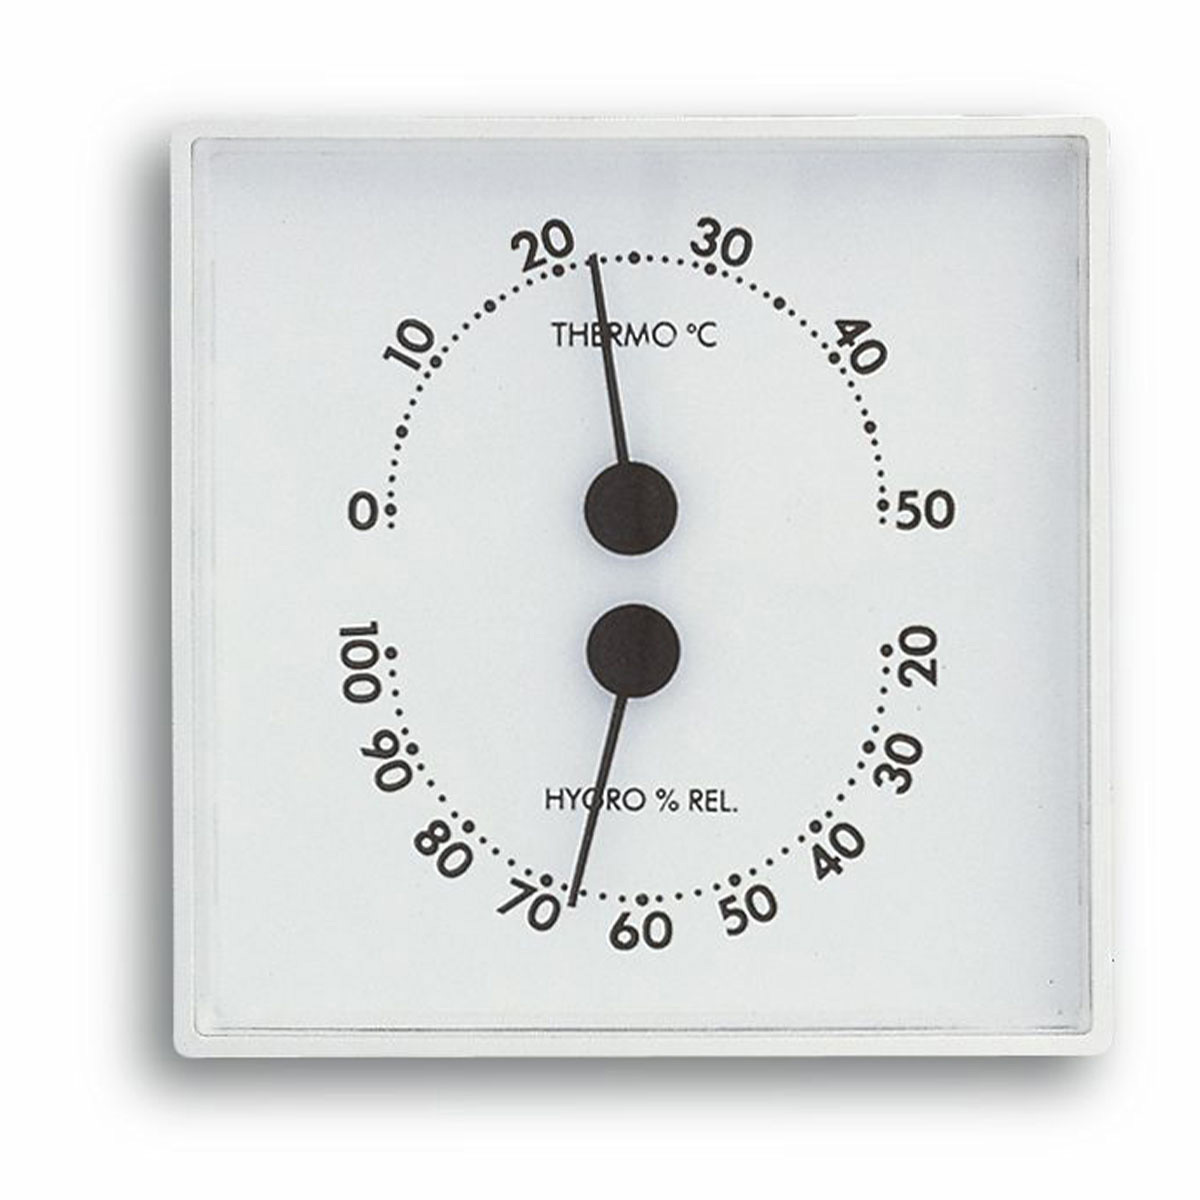 45-2010-02-analoges-thermo-hygrometer-1200x1200px.jpg